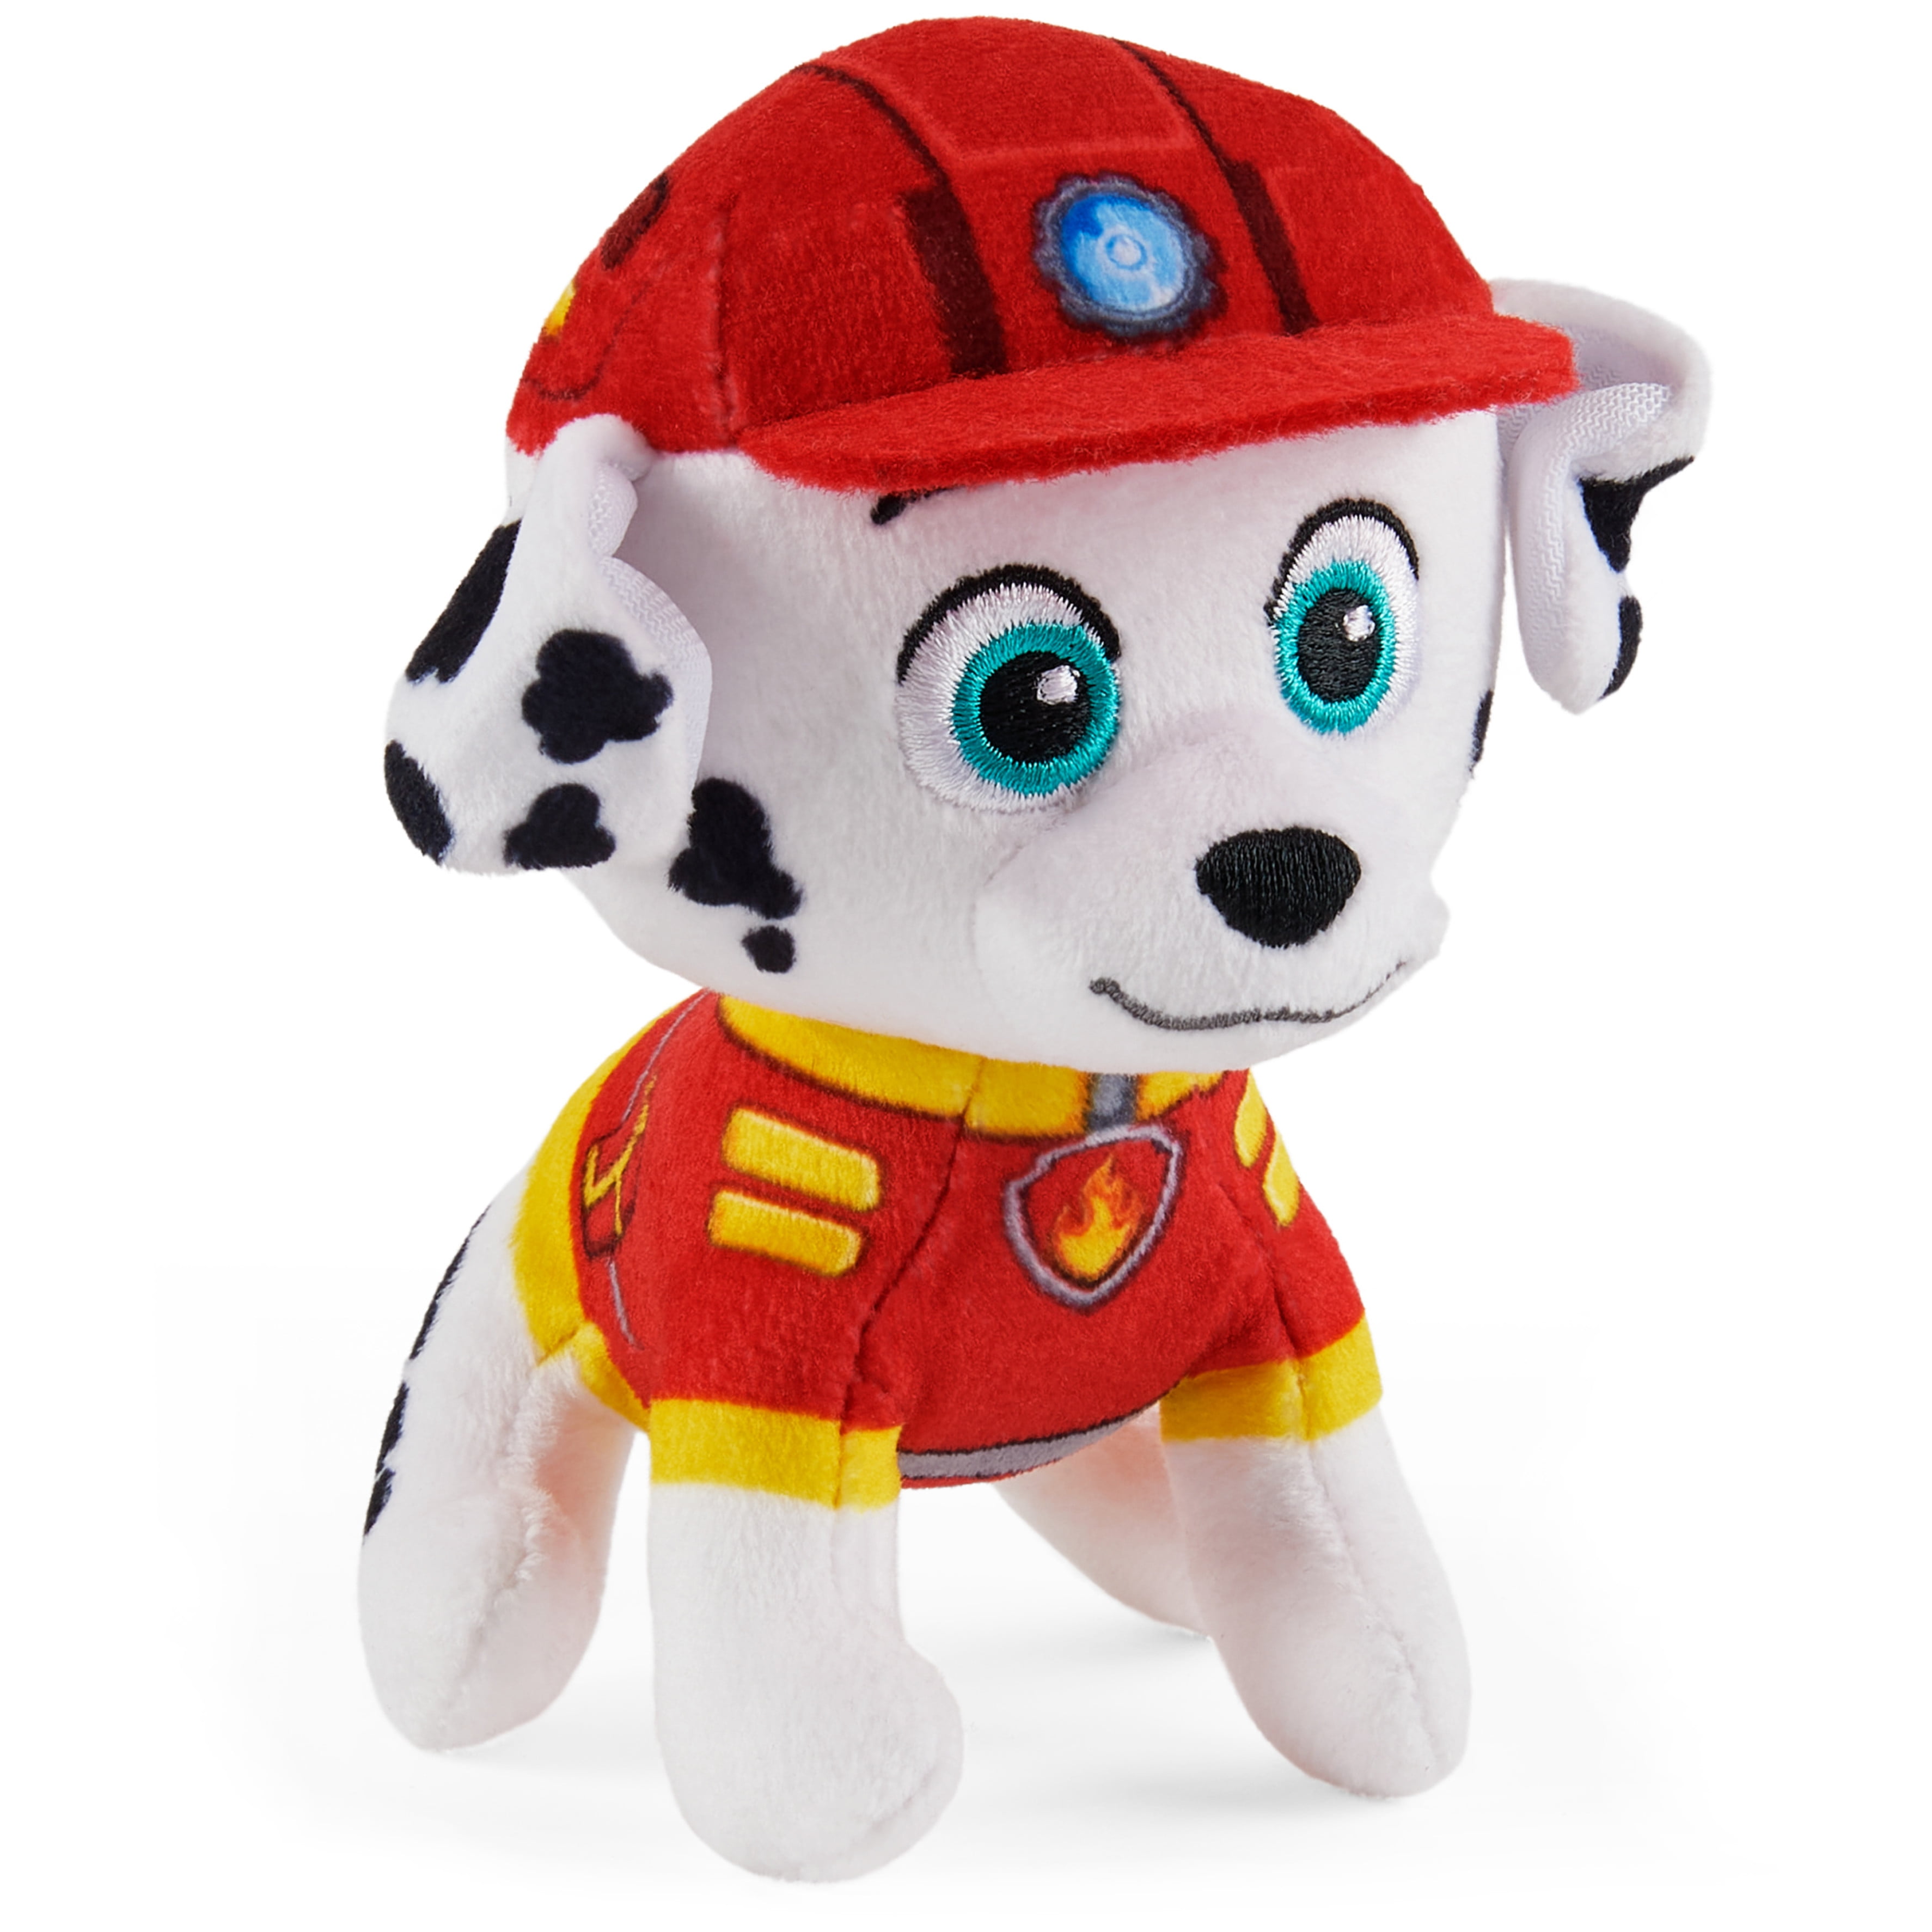 OFFICIAL PAW PATROL JUNGLE RESCUE EVEREST LARGE 12" SOFT TOY PLUSH TEDDY 